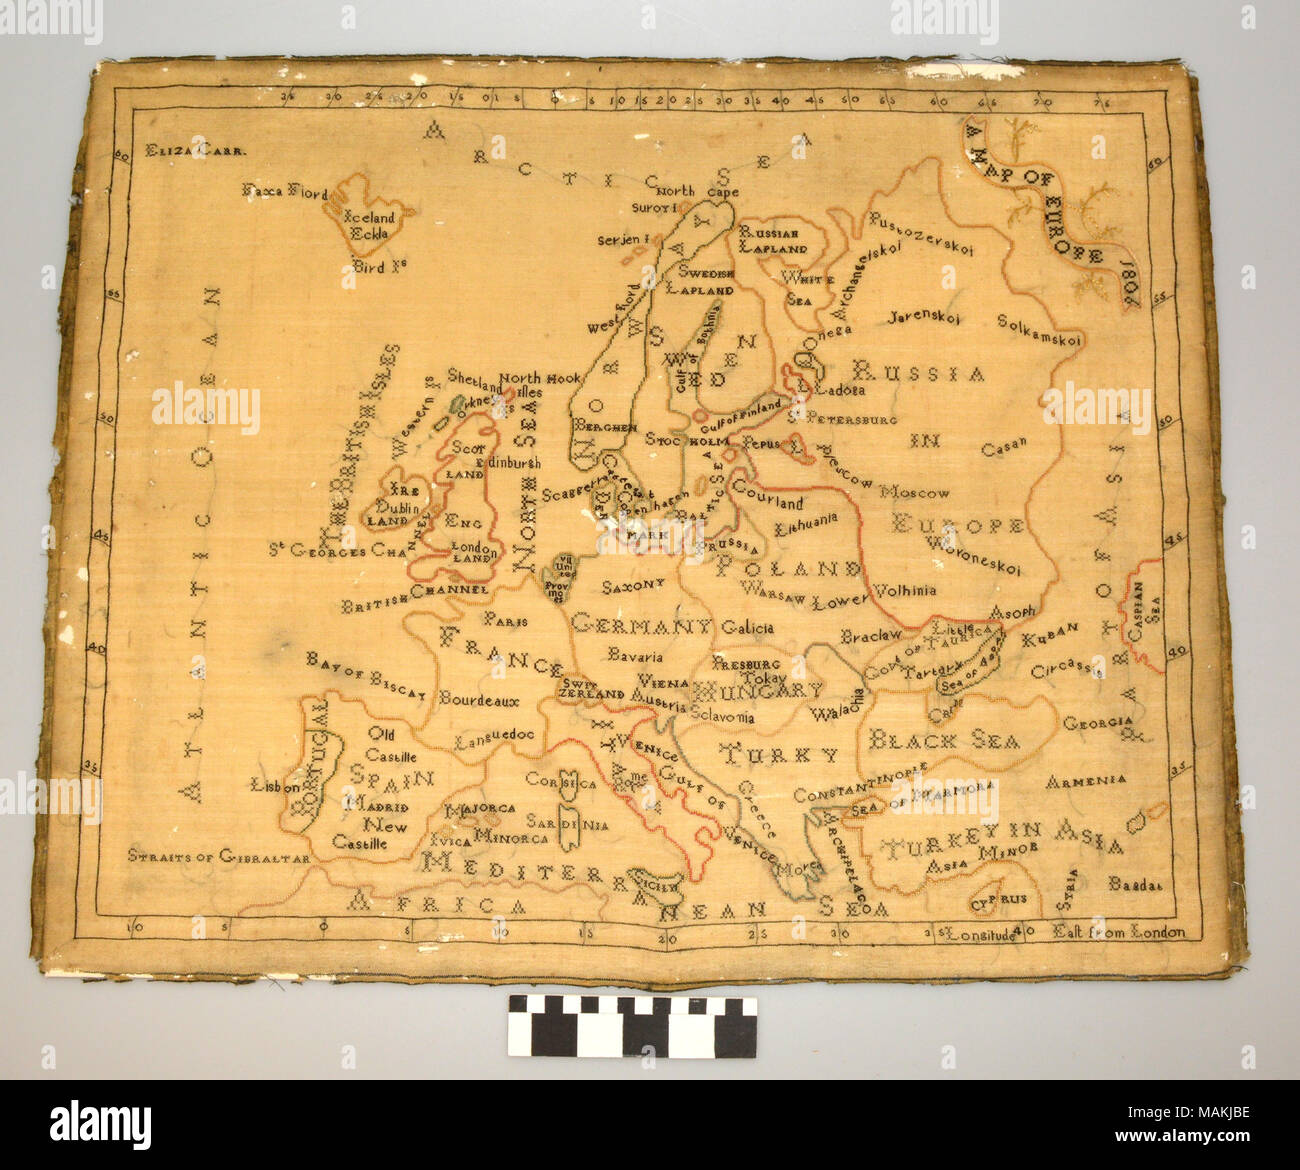 A Map Of Europe Embroidered By Eliza Carr In 1806 Title Map Of Europe Embroidered By Eliza Carr 1806 Eliza Carr Stock Photo Alamy